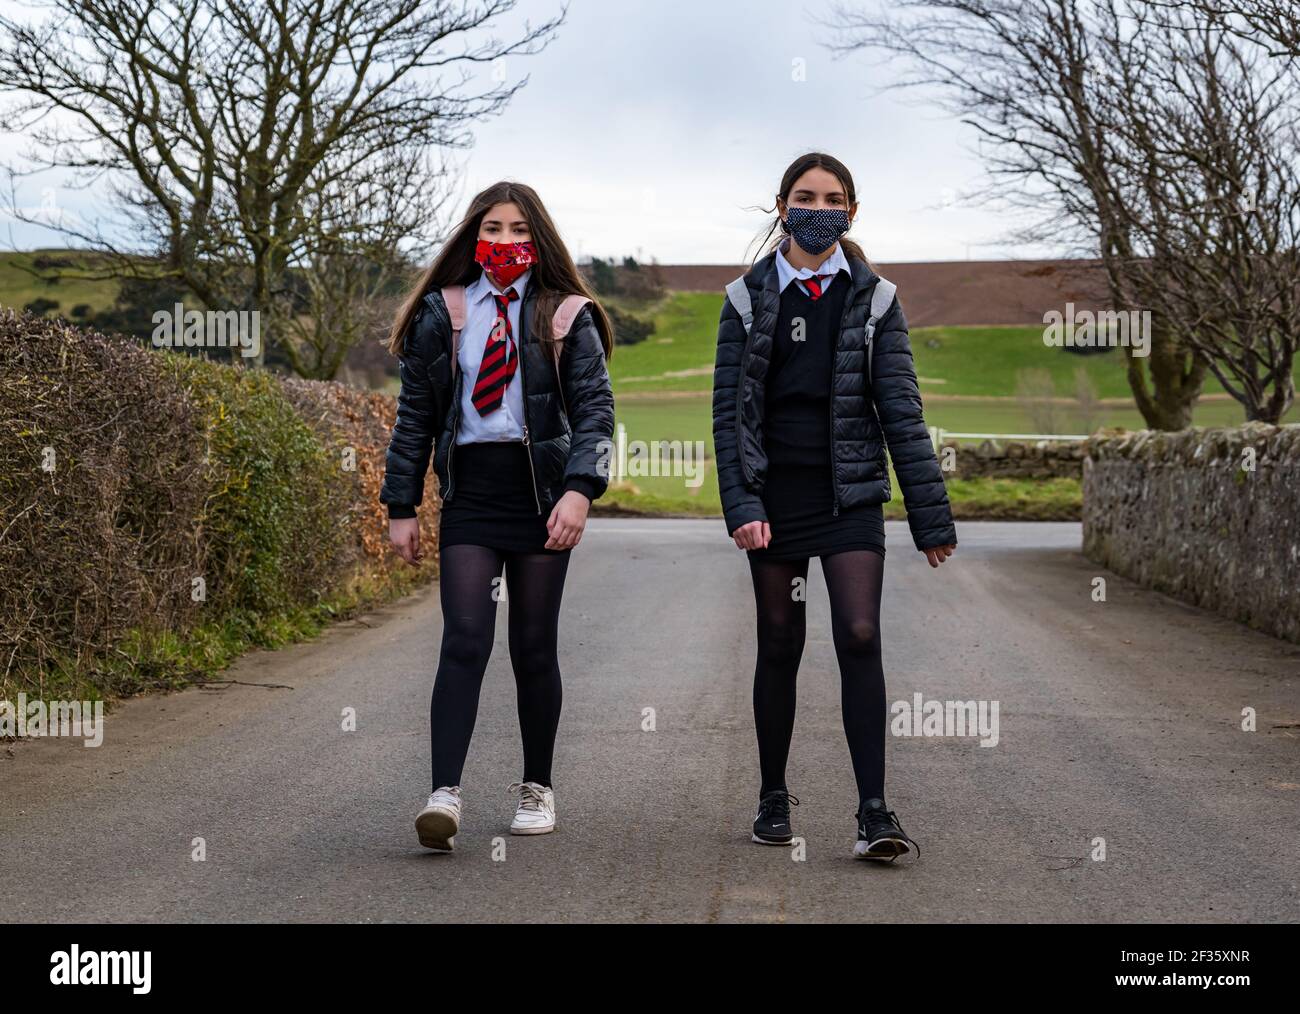 East Lothian, Scotland, United Kingdom, 15th March 2021. School children return to secondary school: Twins, Louisa and Imogen, aged 12 years and in S1 returned to North Berwick High School today for the first time since the recent lockdown during the coronavirus pandemic, but only for 3 hours today for the whole week as they get off the school bus at Kilduff Stock Photo